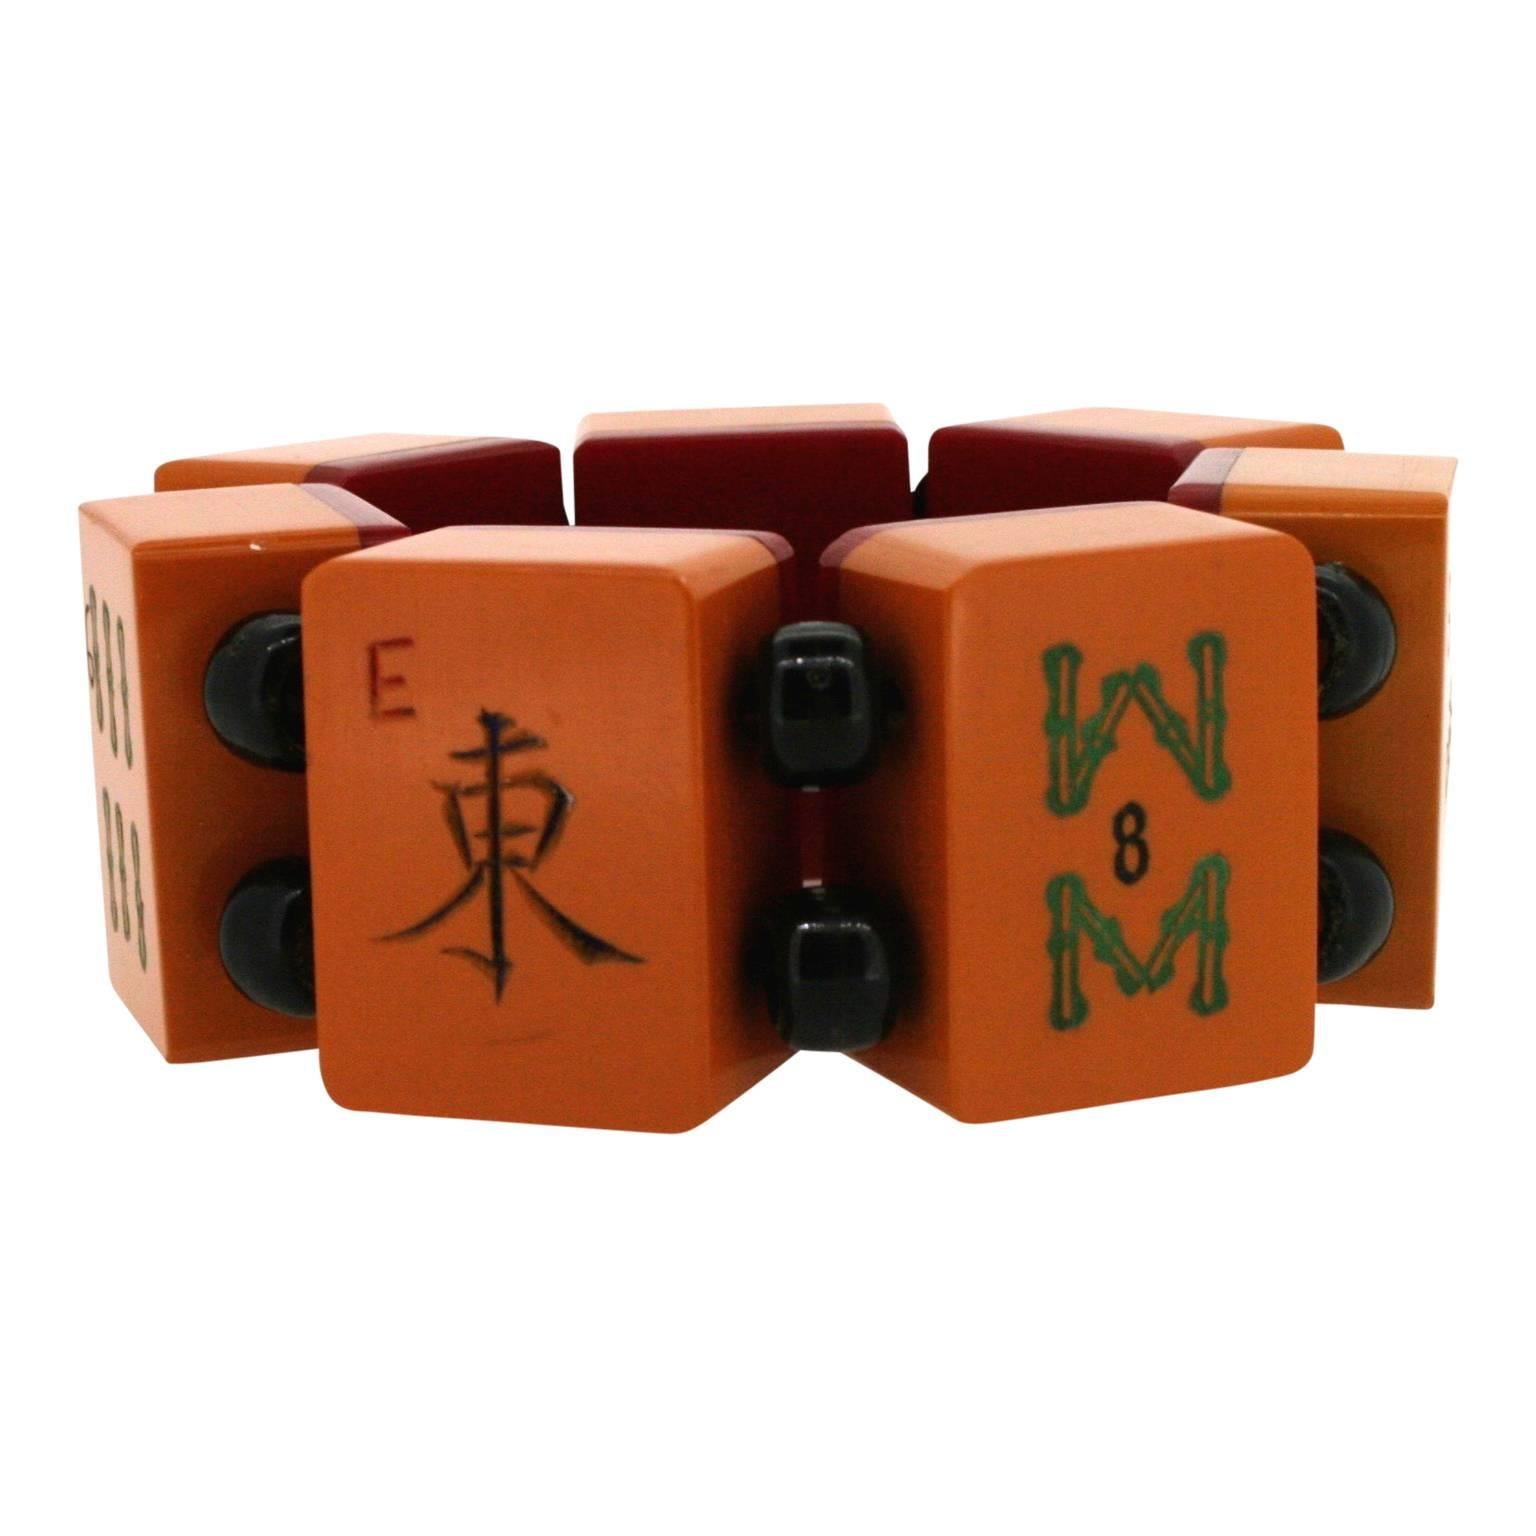 Featuring a typically vibrant orange hued Bakelite, this whimsical bracelet dates from the 1930s.
Condition Report:
Very Good - A little wear to the paint in places consistent with age and use. This is only visible upon very close inspection and